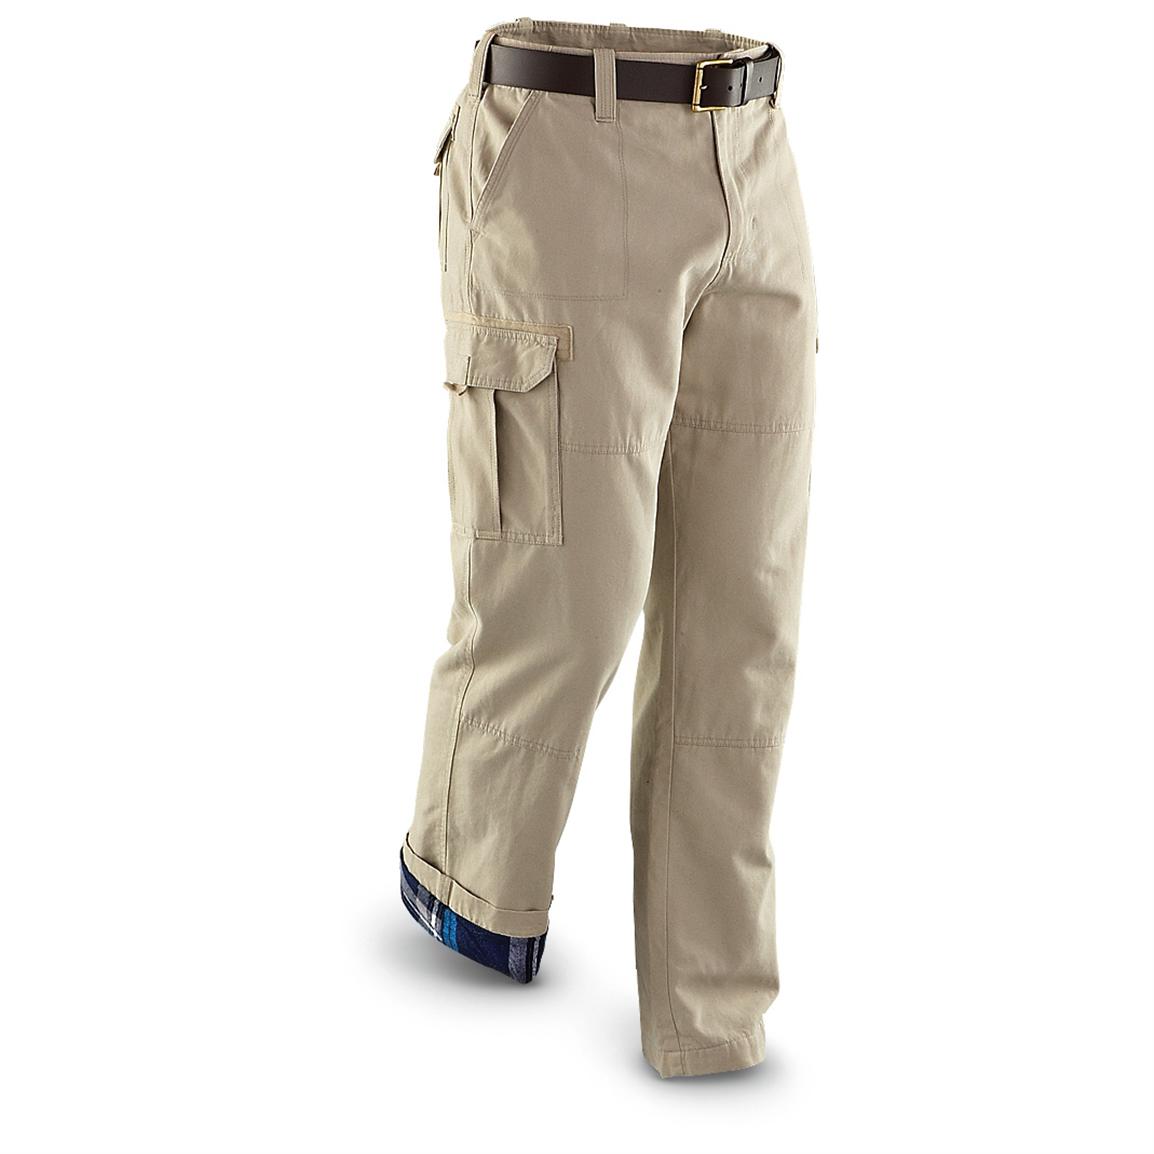 Guide Gear Men's Flannel Lined Cargo Pants - 224165, Insulated Pants ...